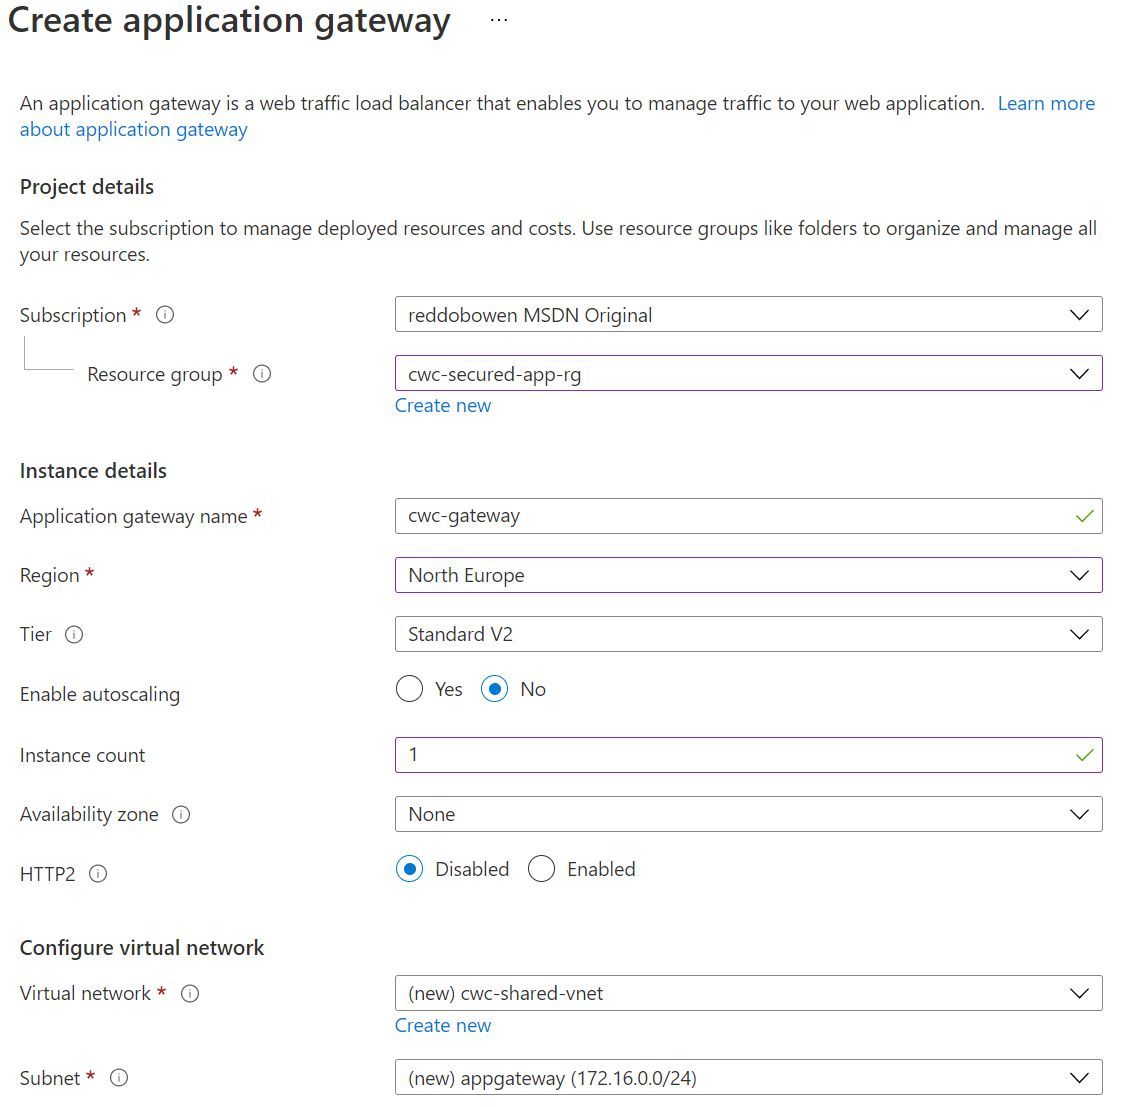 Screenshot showing the Basics tab of the Application Gateway creation experience